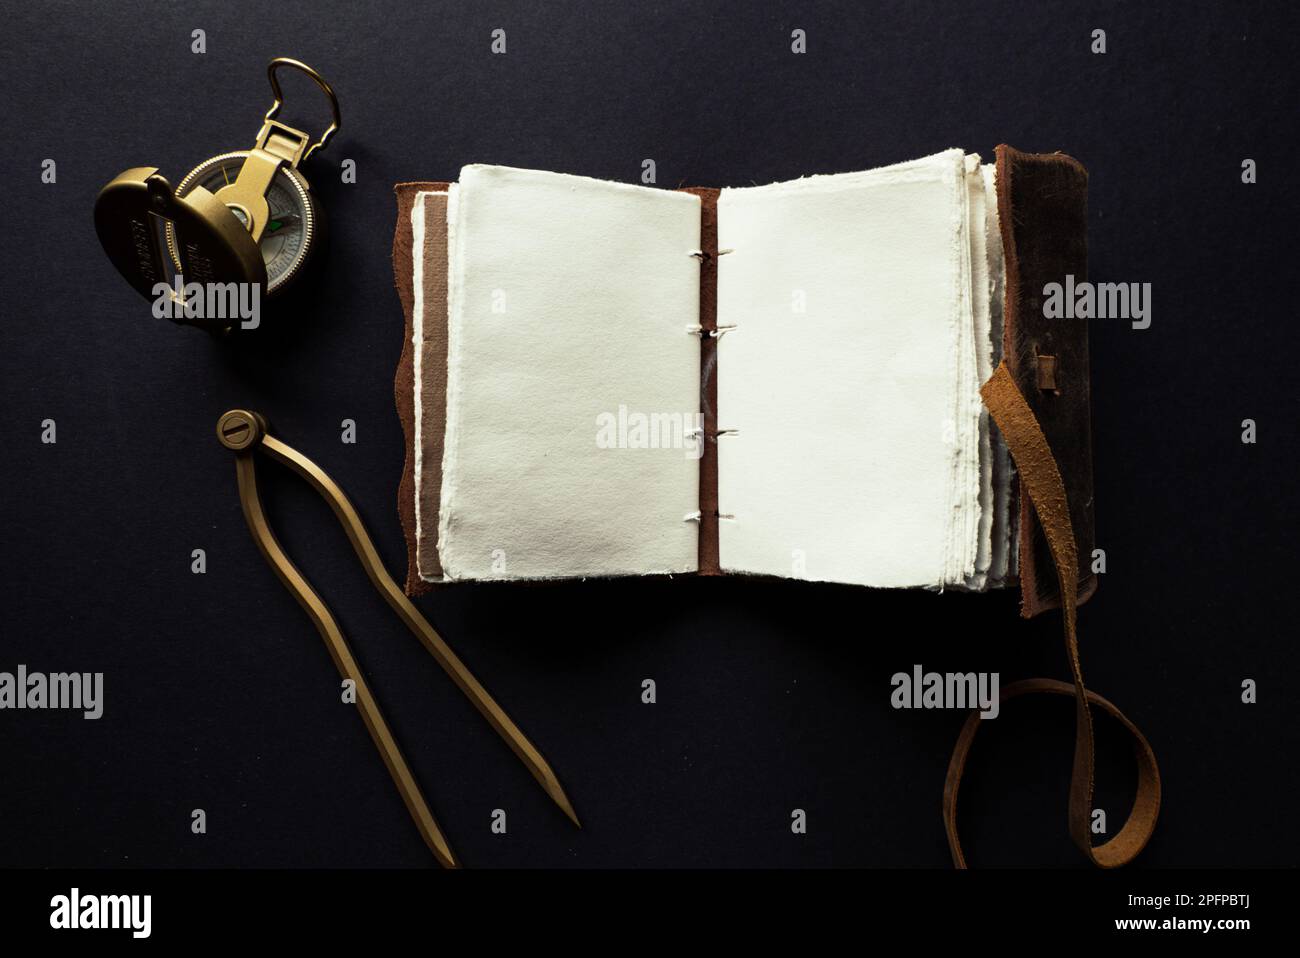 Vintage leather journal or diary on a black table with a compass next to it Stock Photo